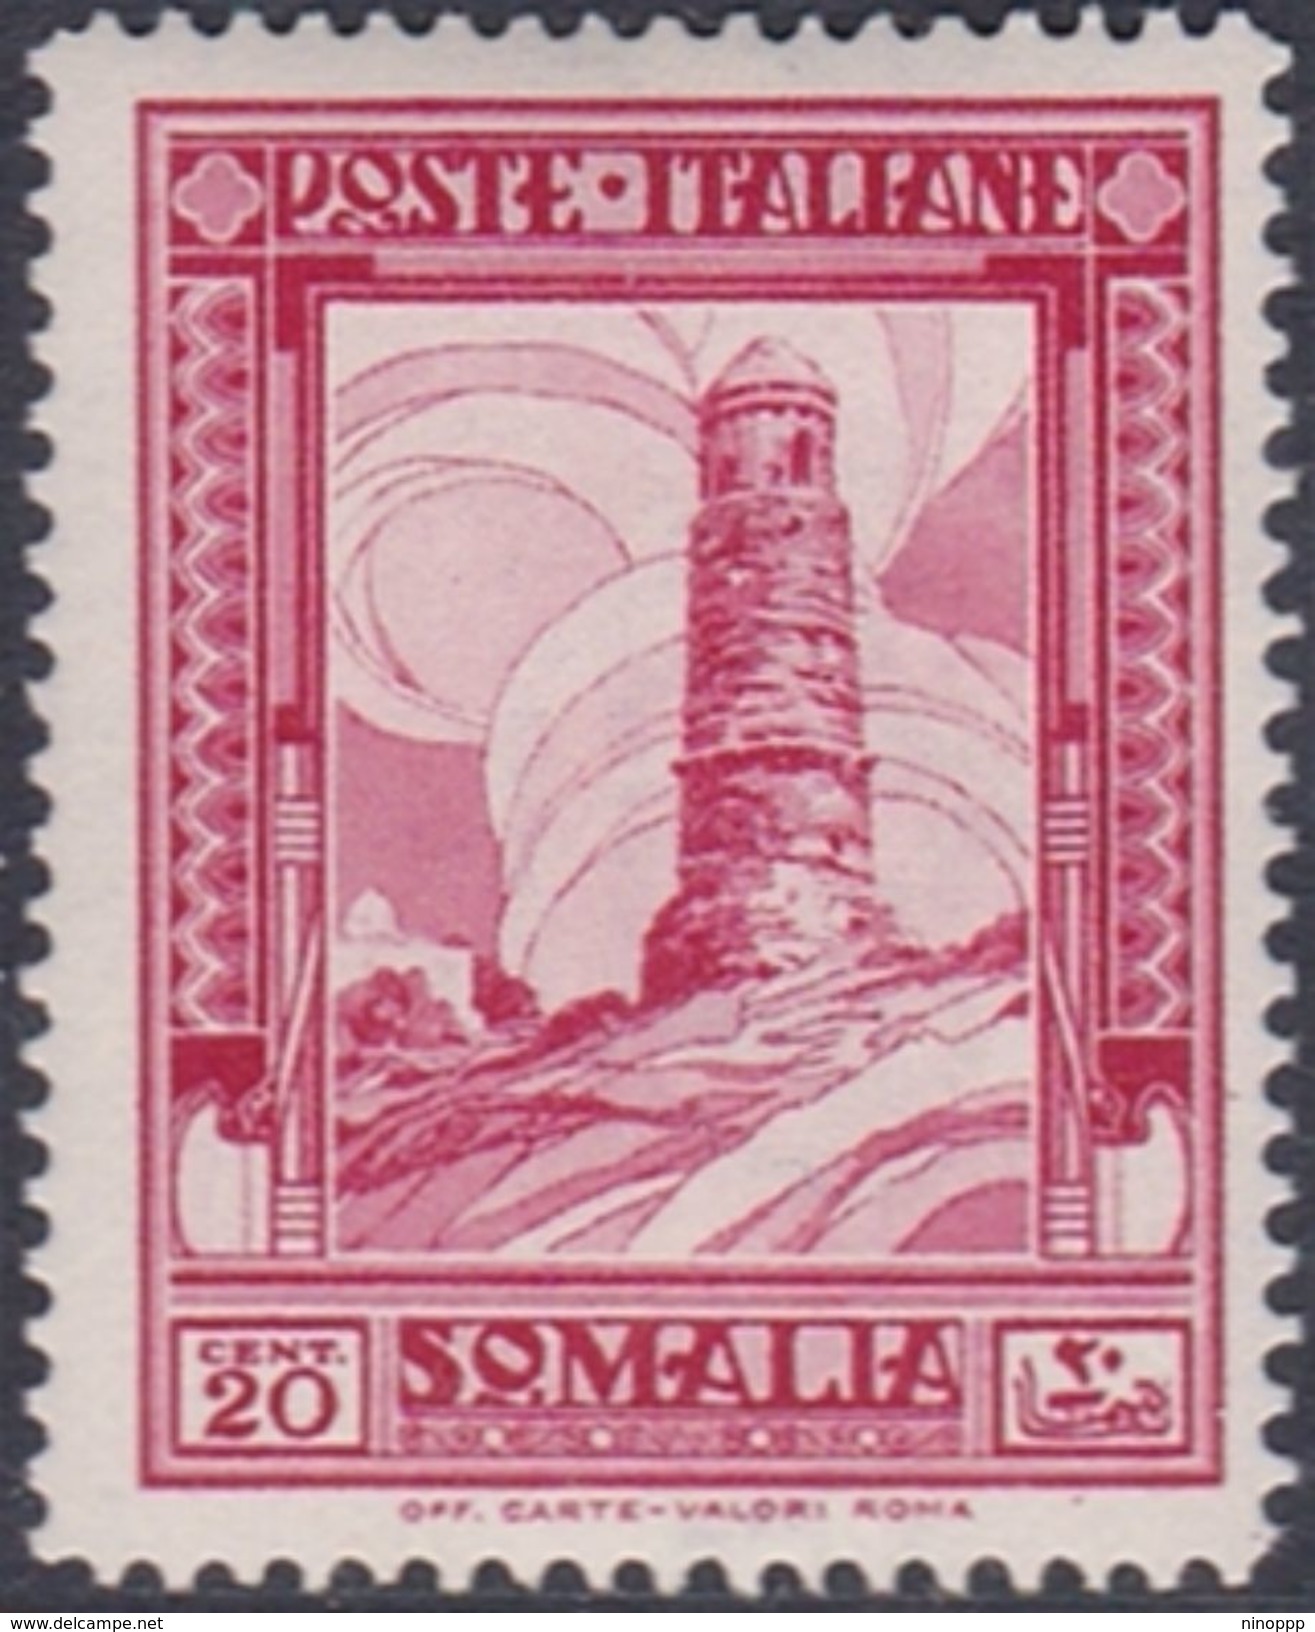 Italy-Colonies And Territories-Somalia S217 1935 Pictorials Perf 14  20c Red Mnara Tower, MNH - Somalia